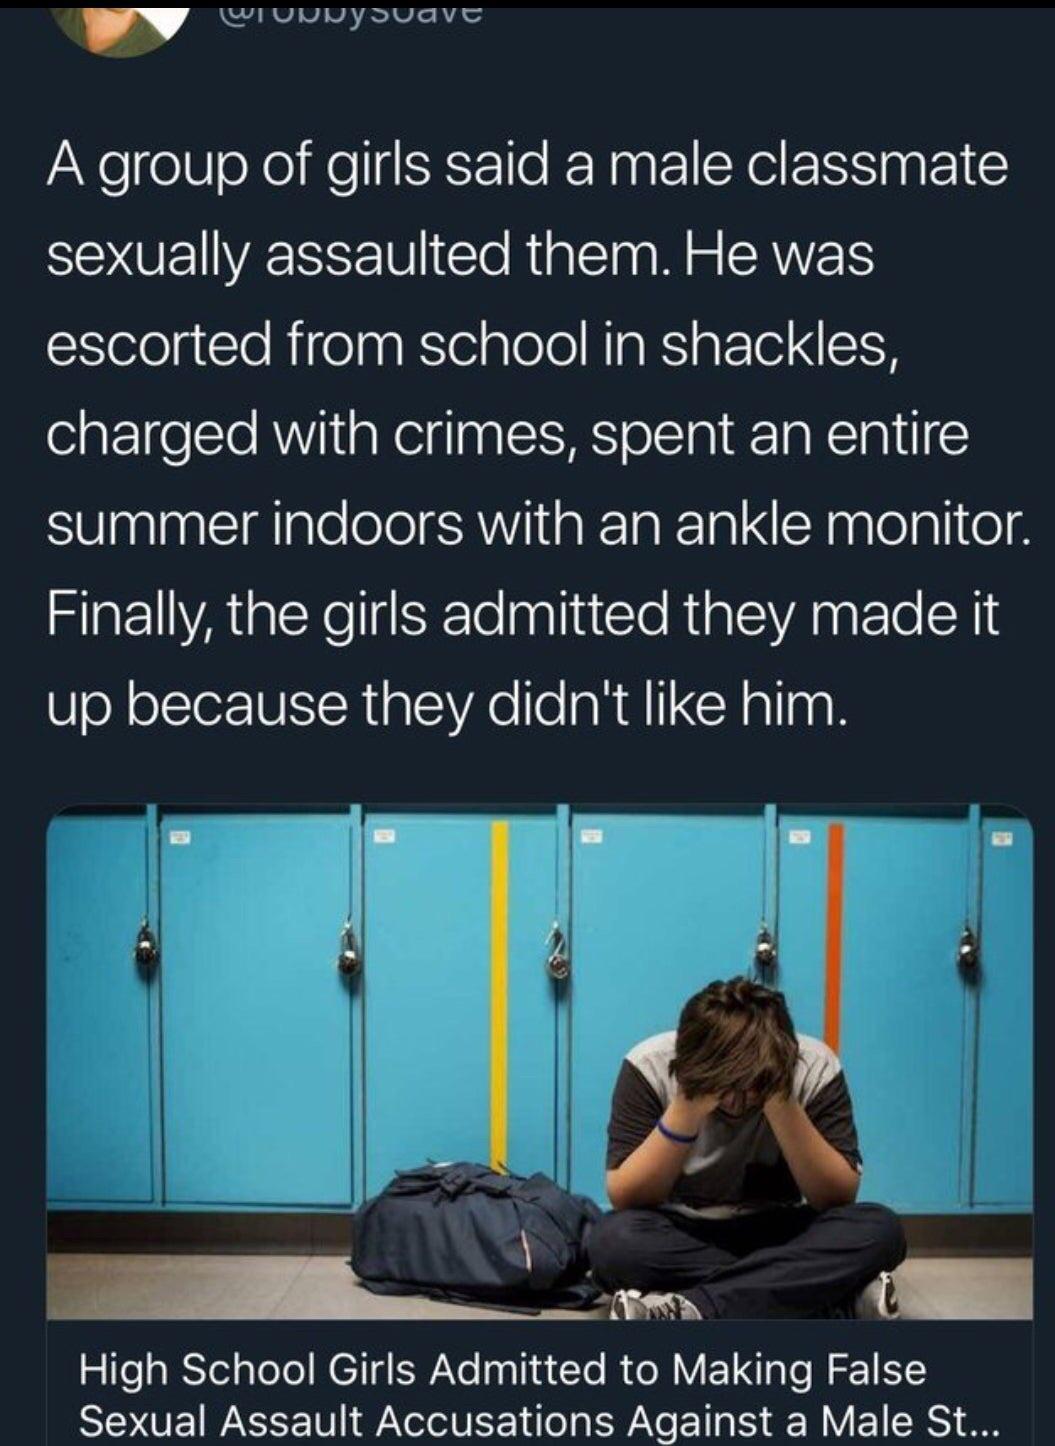 Girl - w A group of girls said a male classmate sexually assaulted them. He was escorted from school in shackles, charged with crimes, spent an entire summer indoors with an ankle monitor. Finally, the girls admitted they made it up because they didn't hi